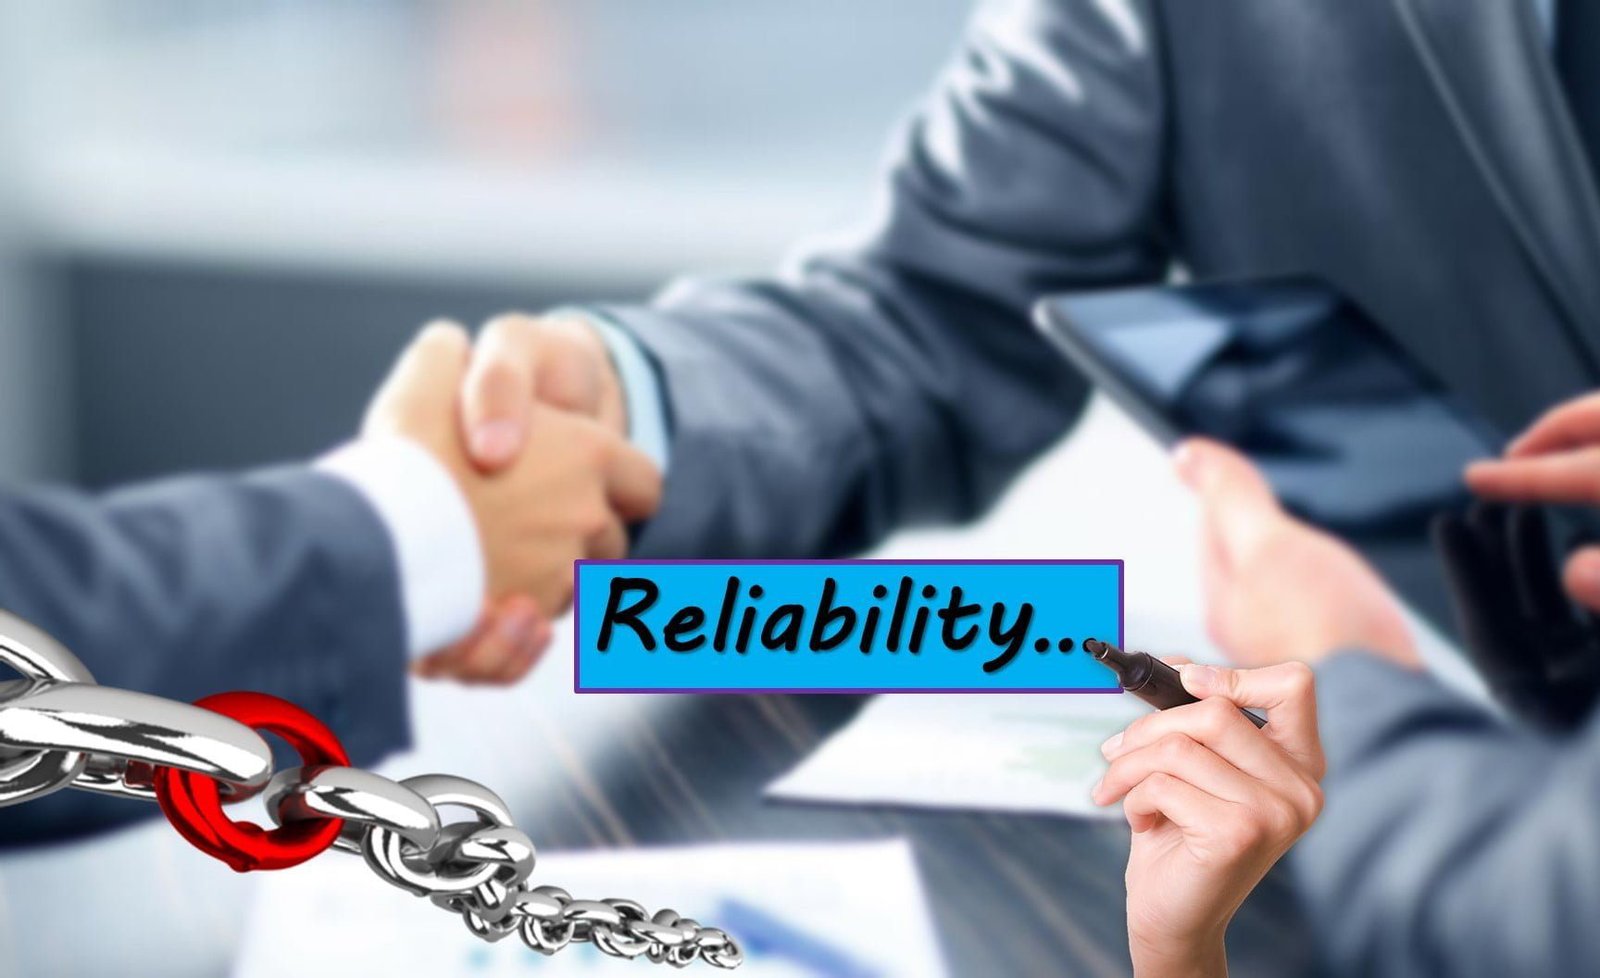 reliability personality tests